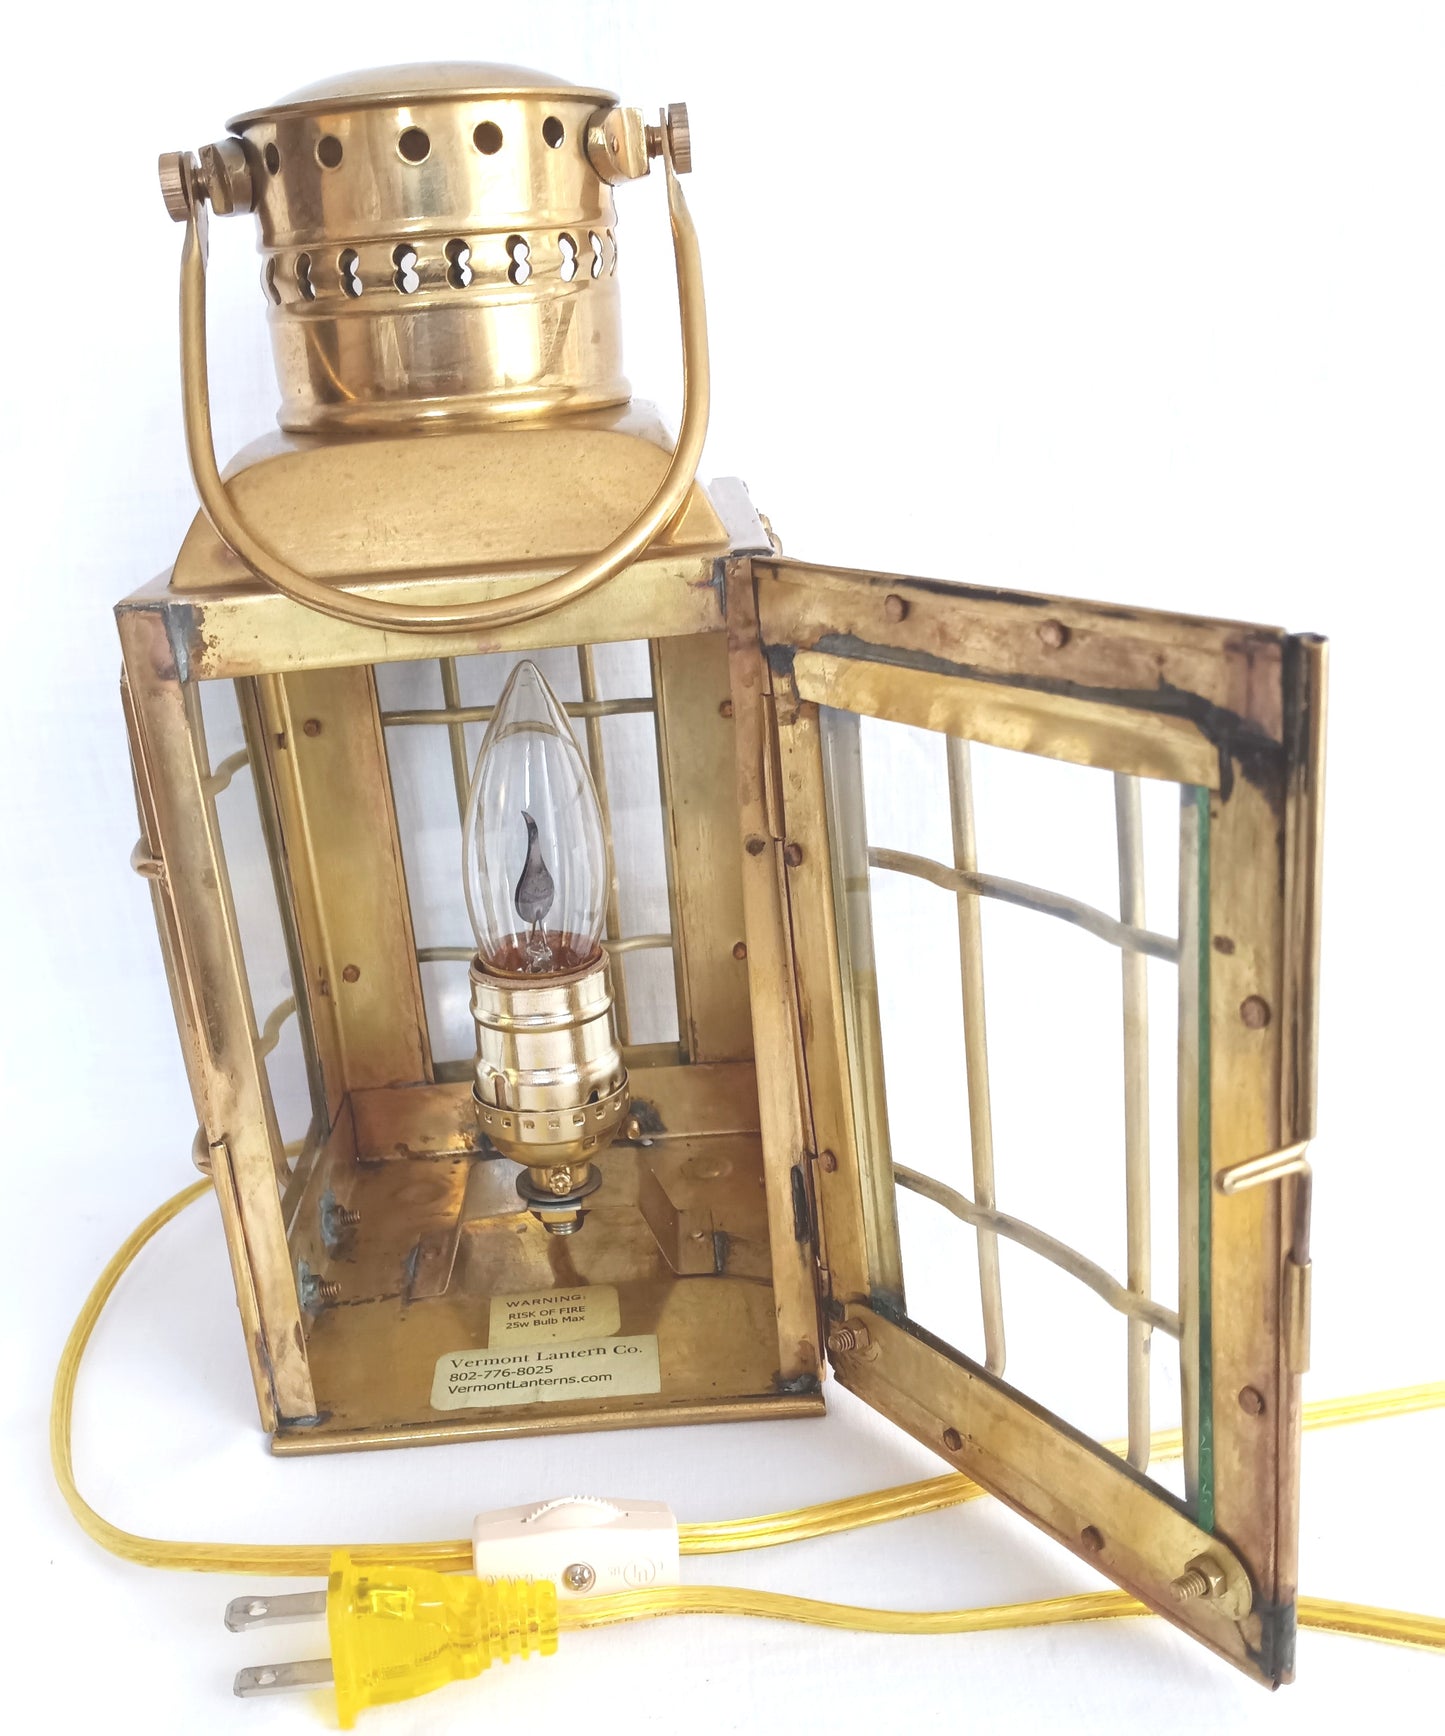 Vintage Vermont Lantern Co. Solid Brass Nautical Electric Table/Hanging Lamp In Cord Switch Marine Light Fixture Bar Boat Coastal Home Décor